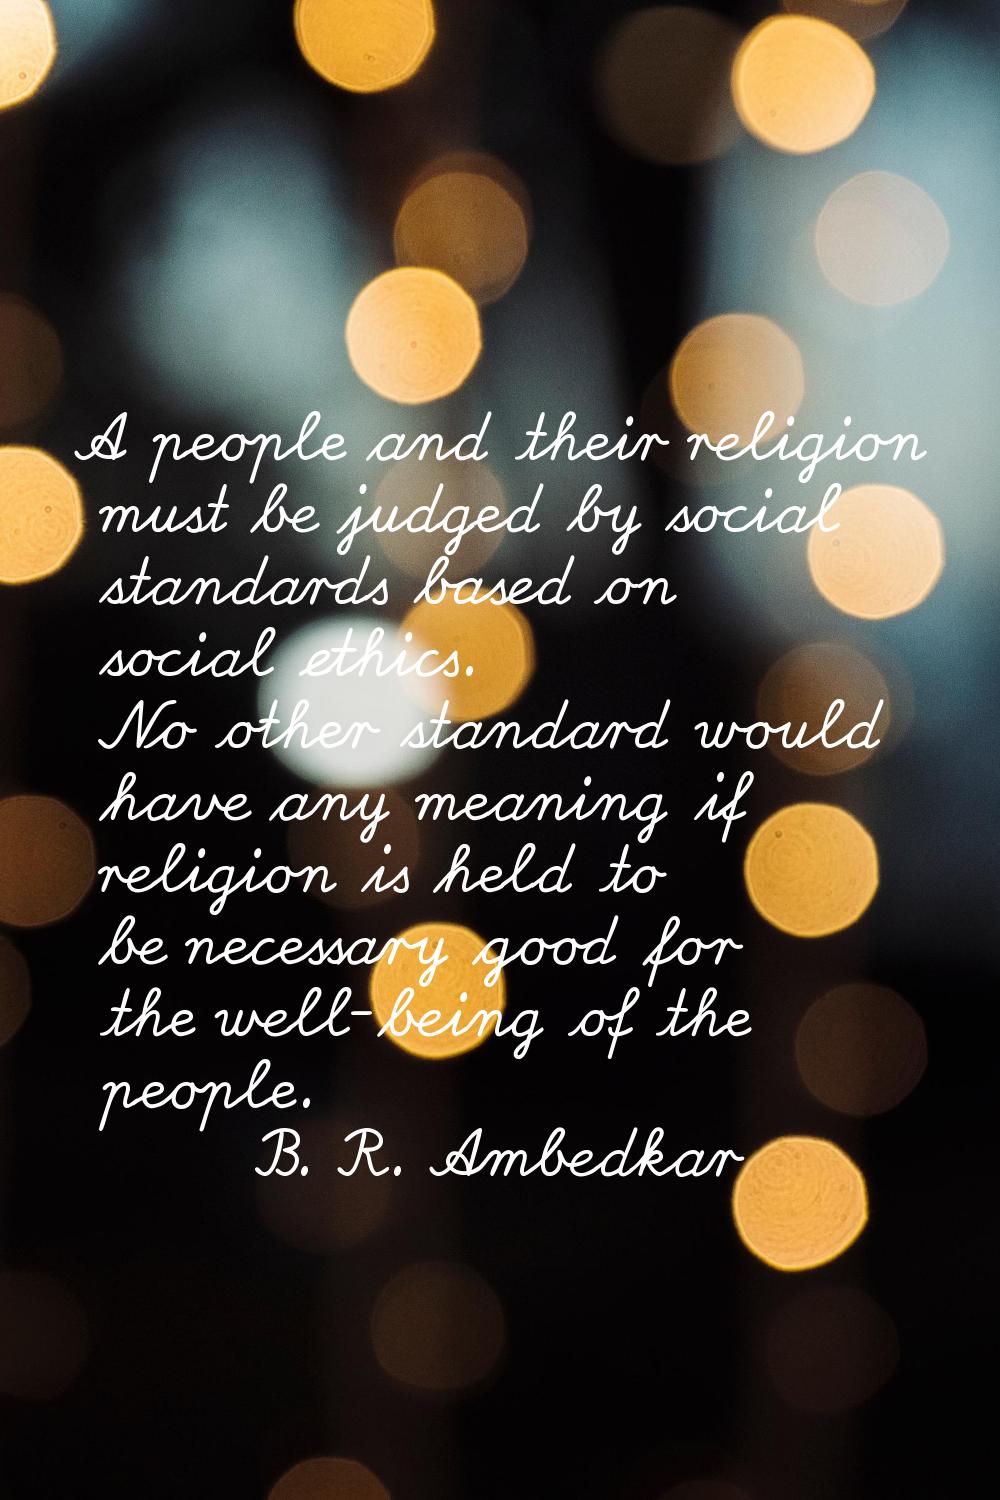 A people and their religion must be judged by social standards based on social ethics. No other sta